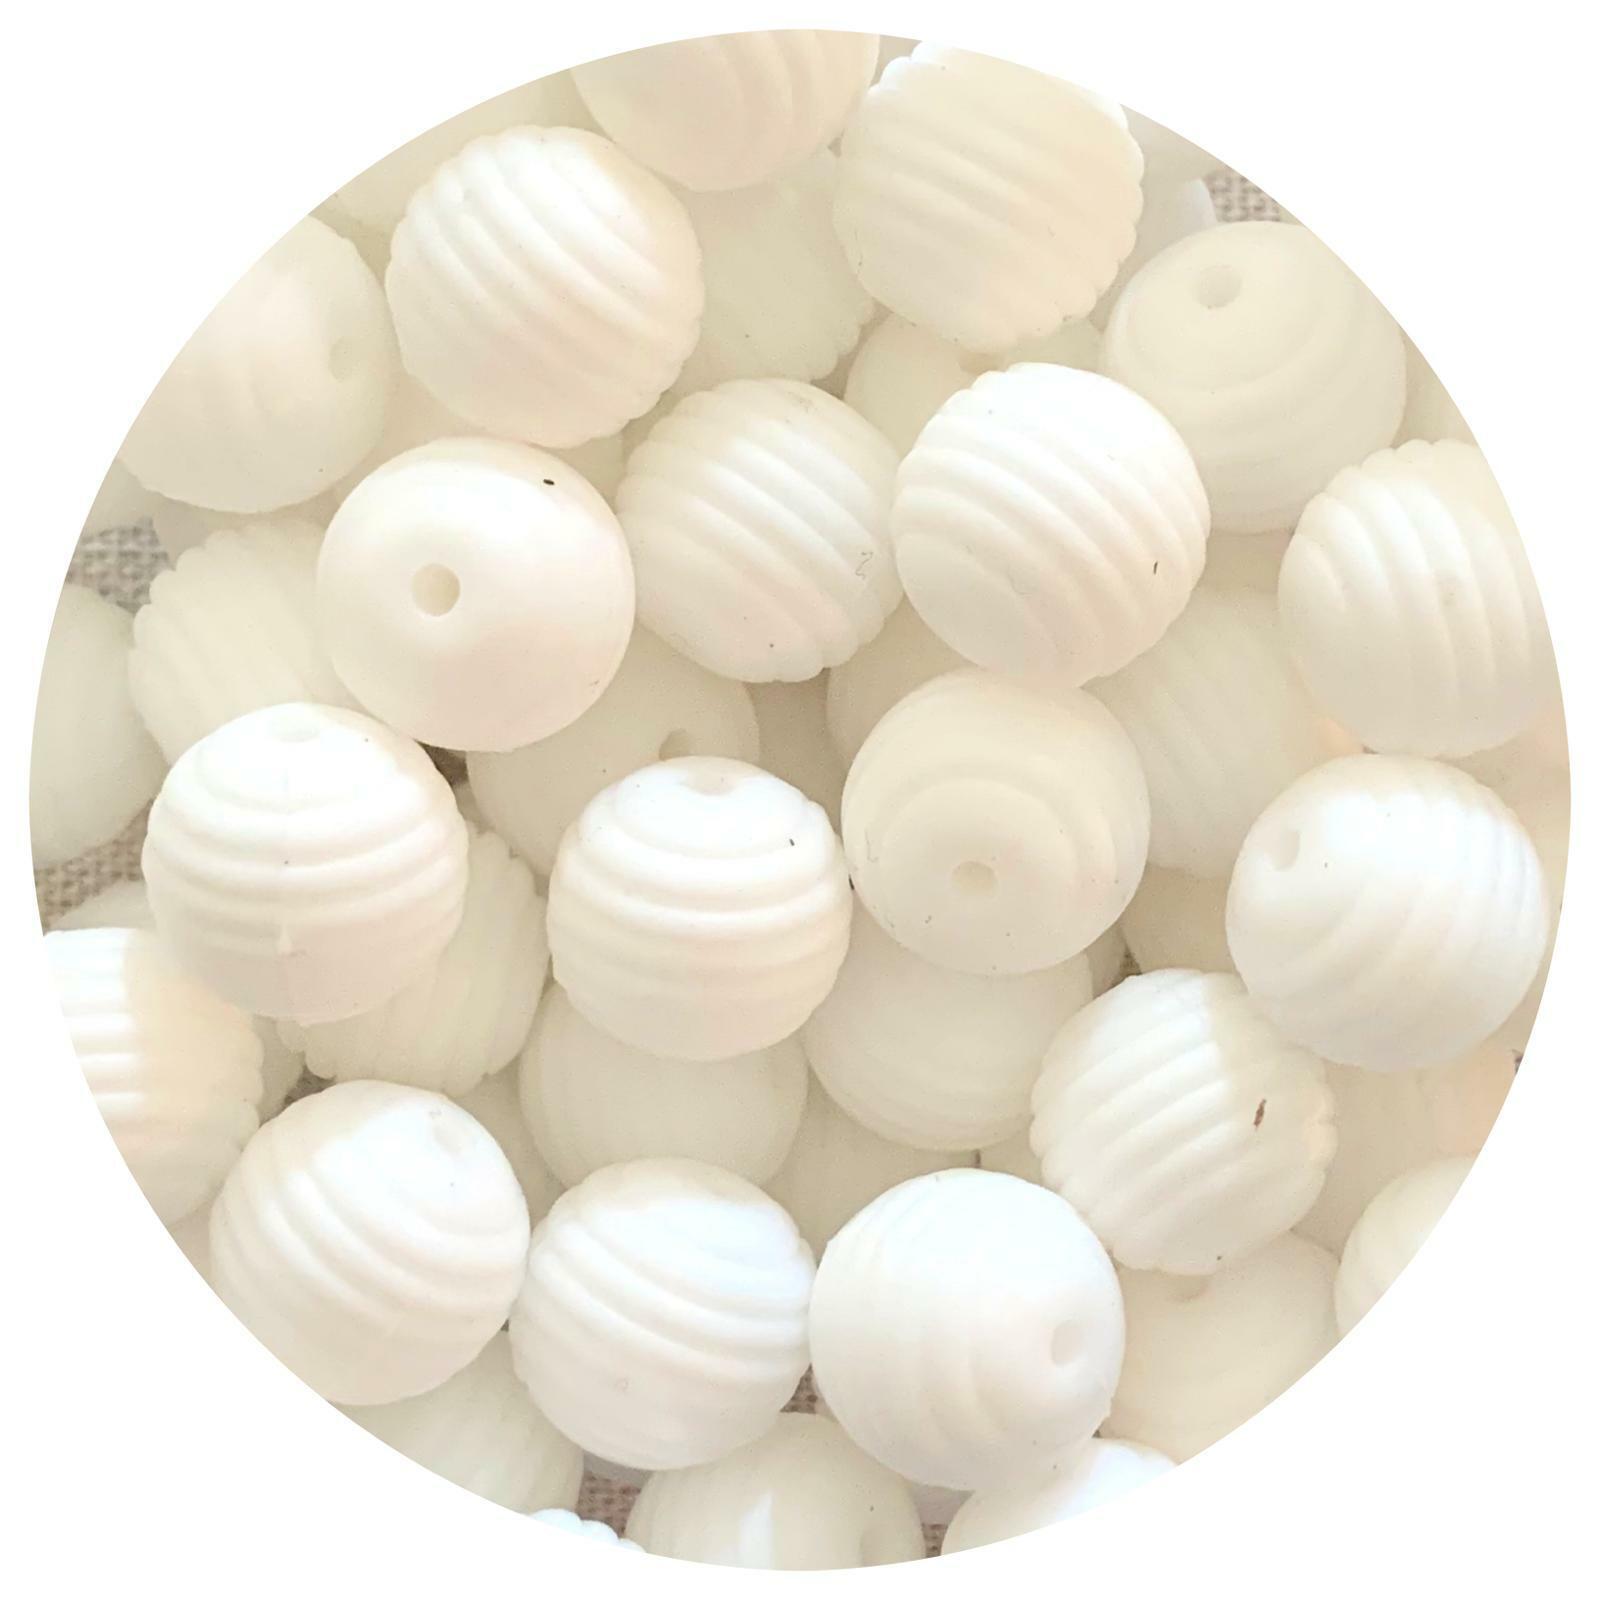 10 silicone beads SNOW WHITE 15mm BEEHIVE round textured jewellery DIY keyring AJ Craft Supplies